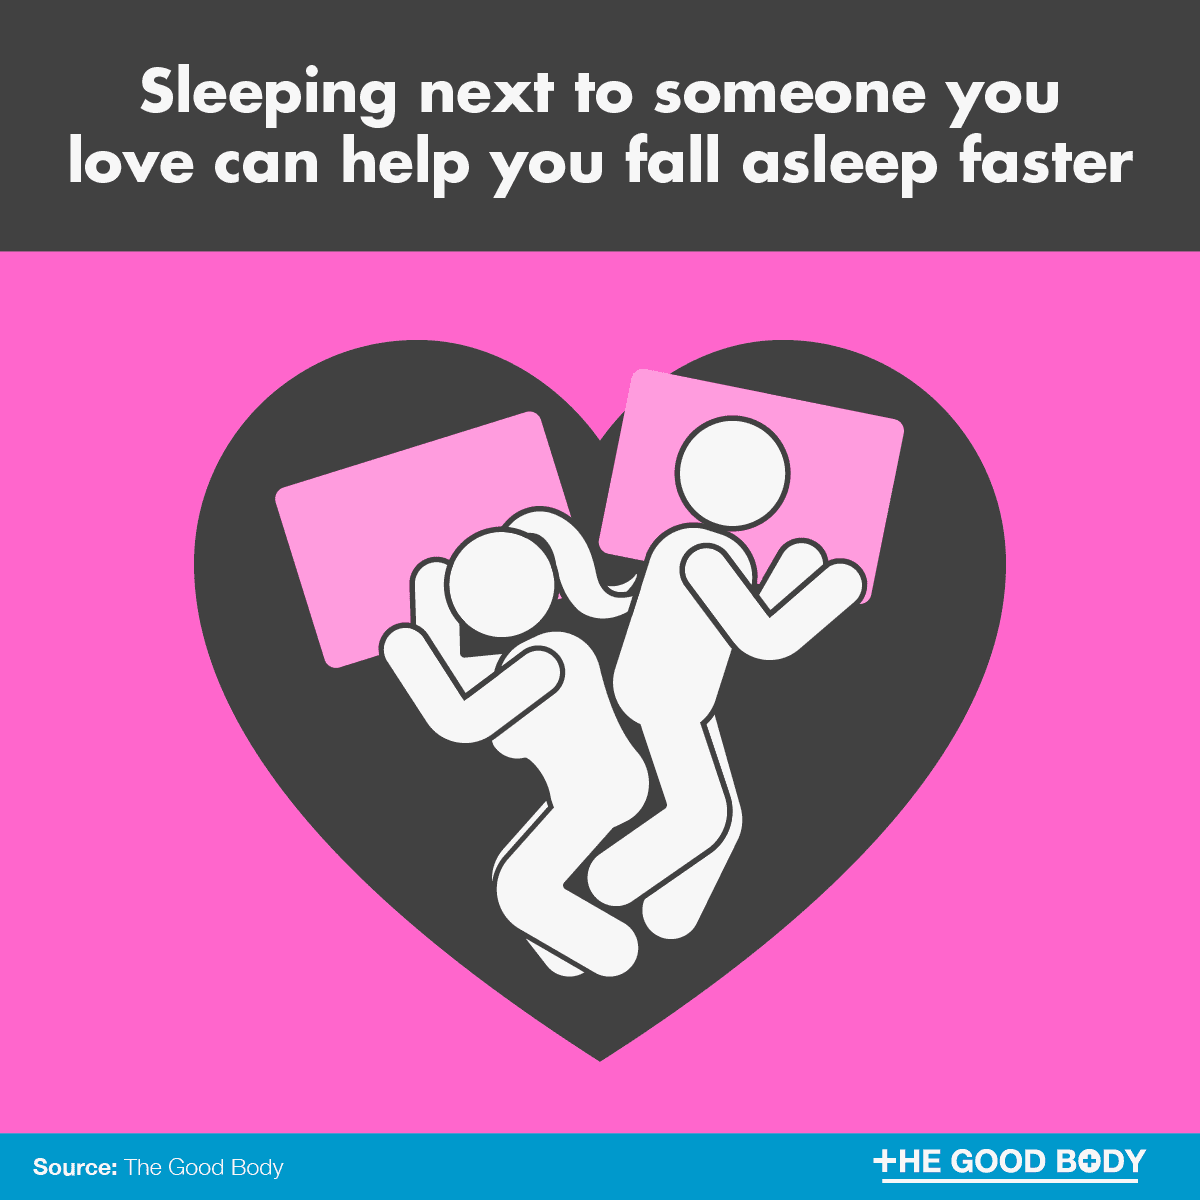 Infographic: Sleeping next to someone you love can help you fall asleep faster